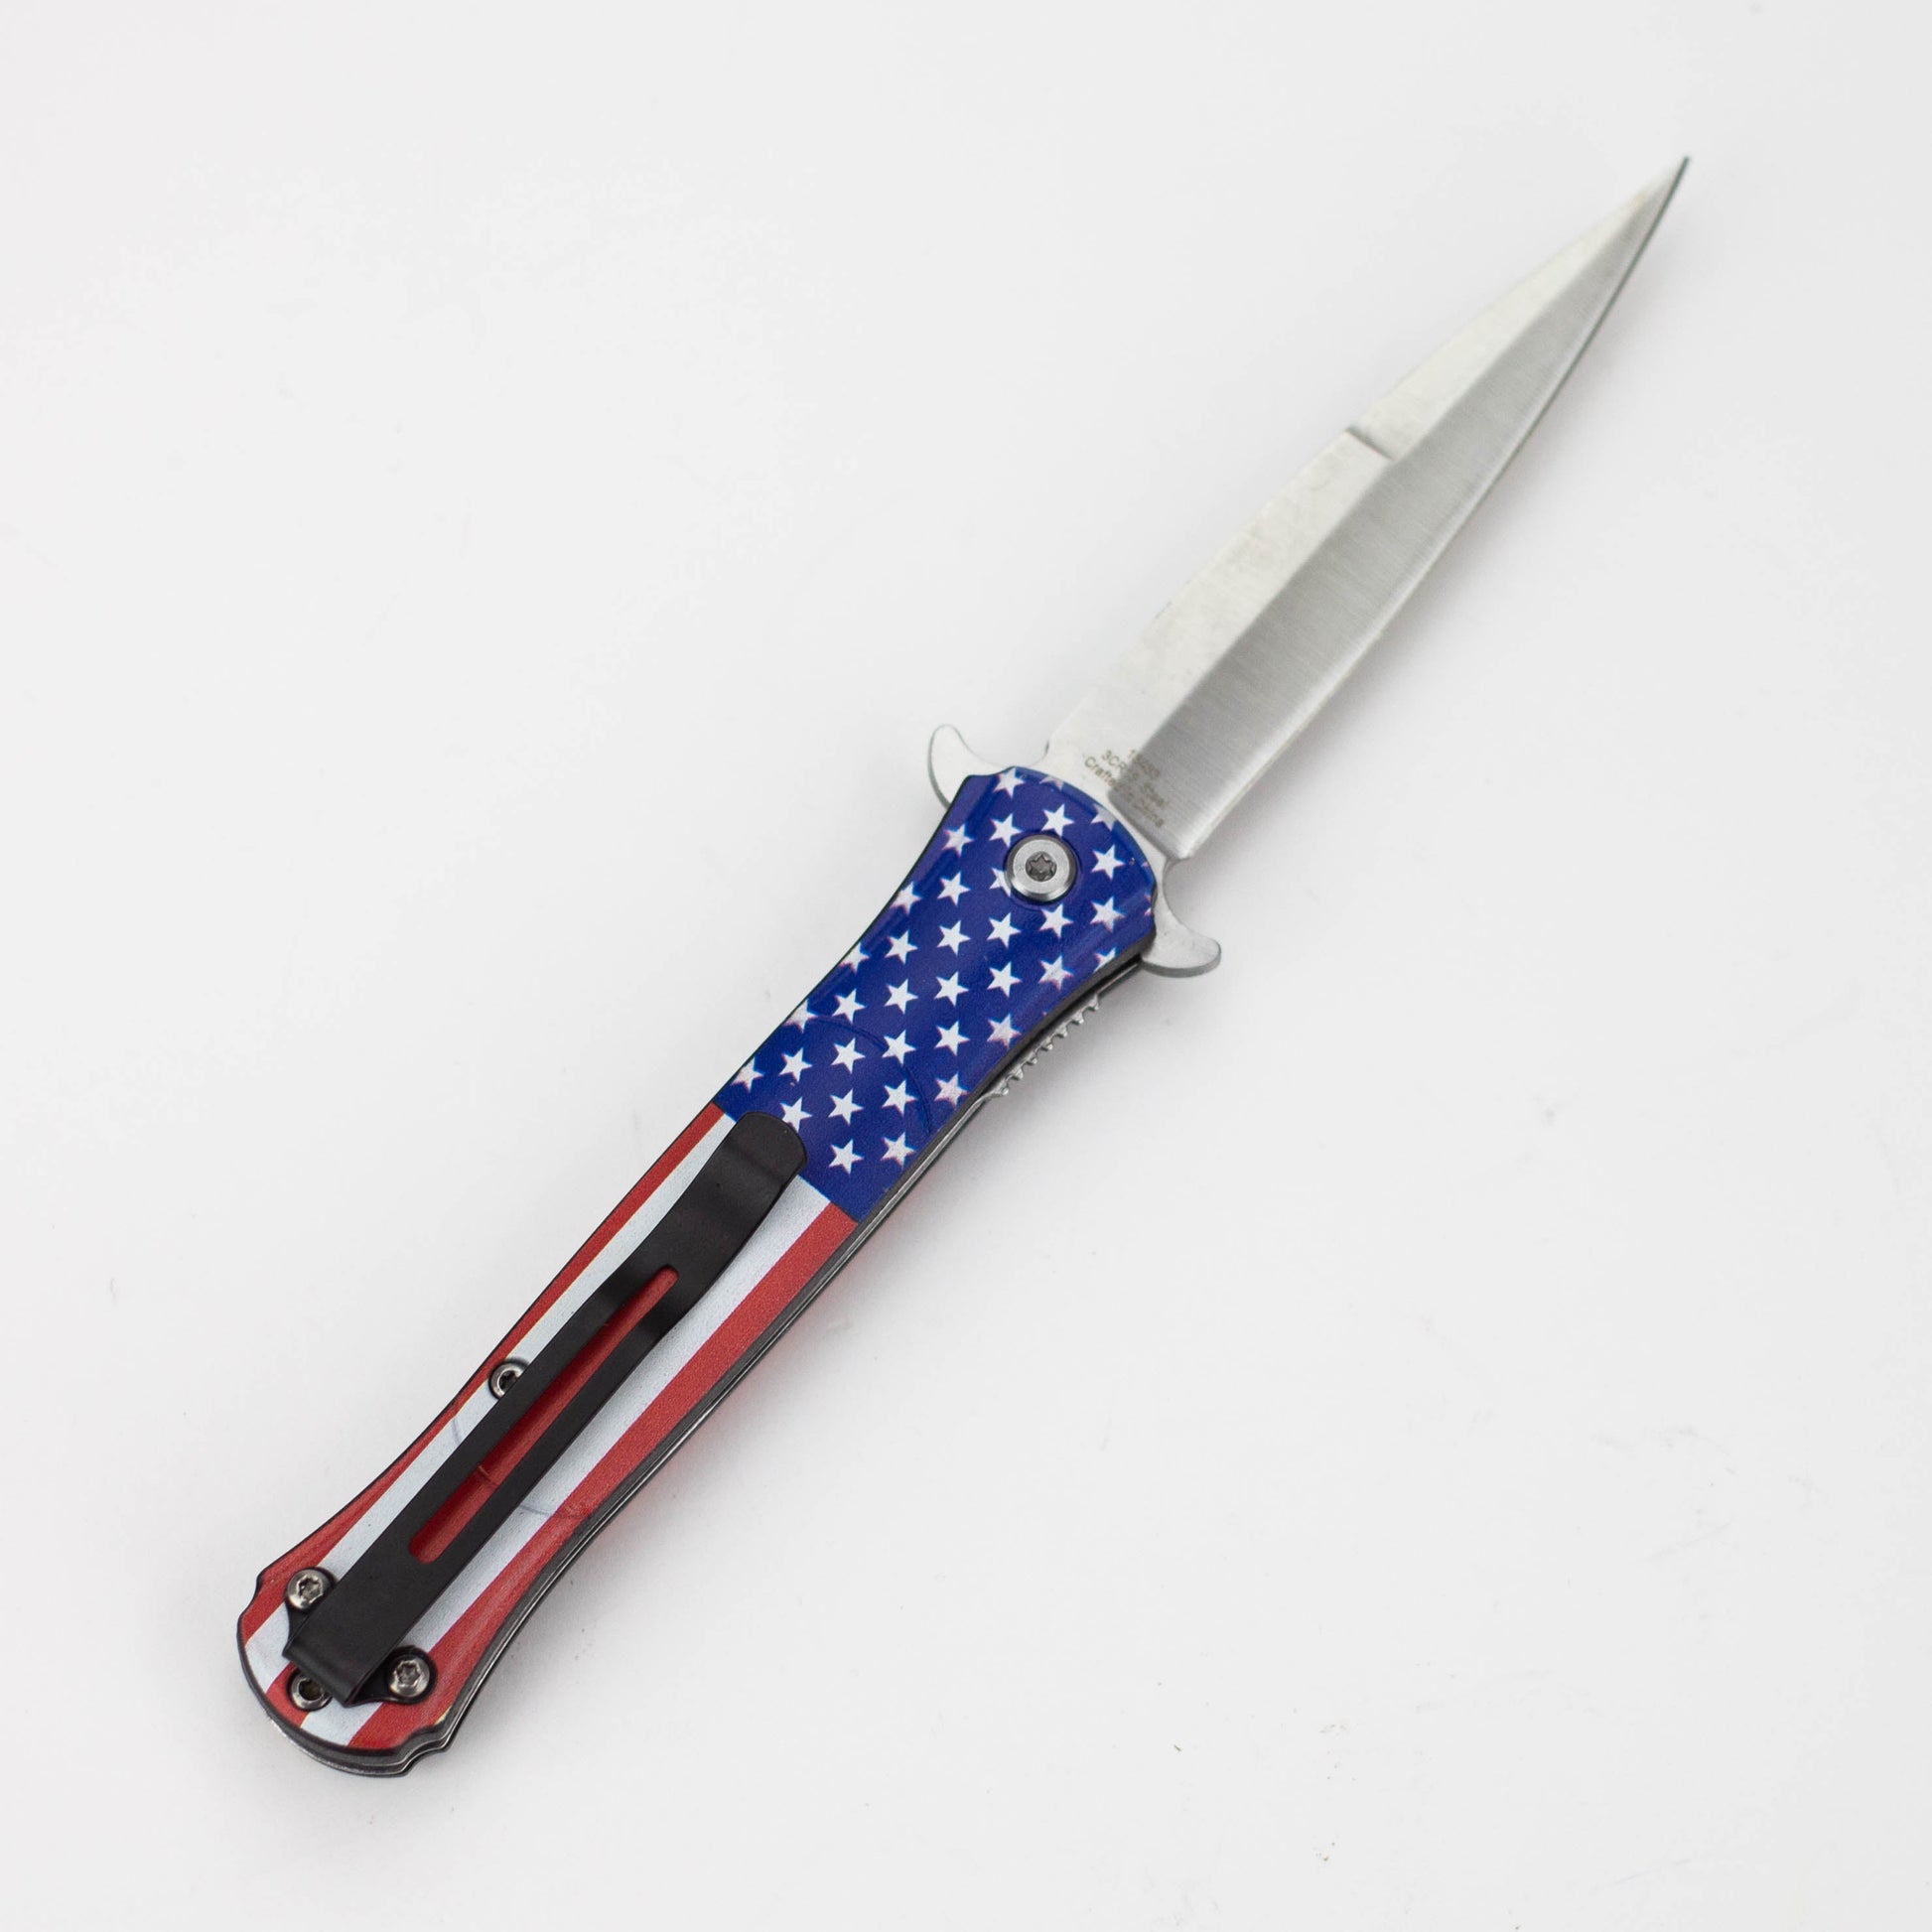 8.5" Folding Knife Rescue Stainless Steel Unique Art Handle Red [13433]_1